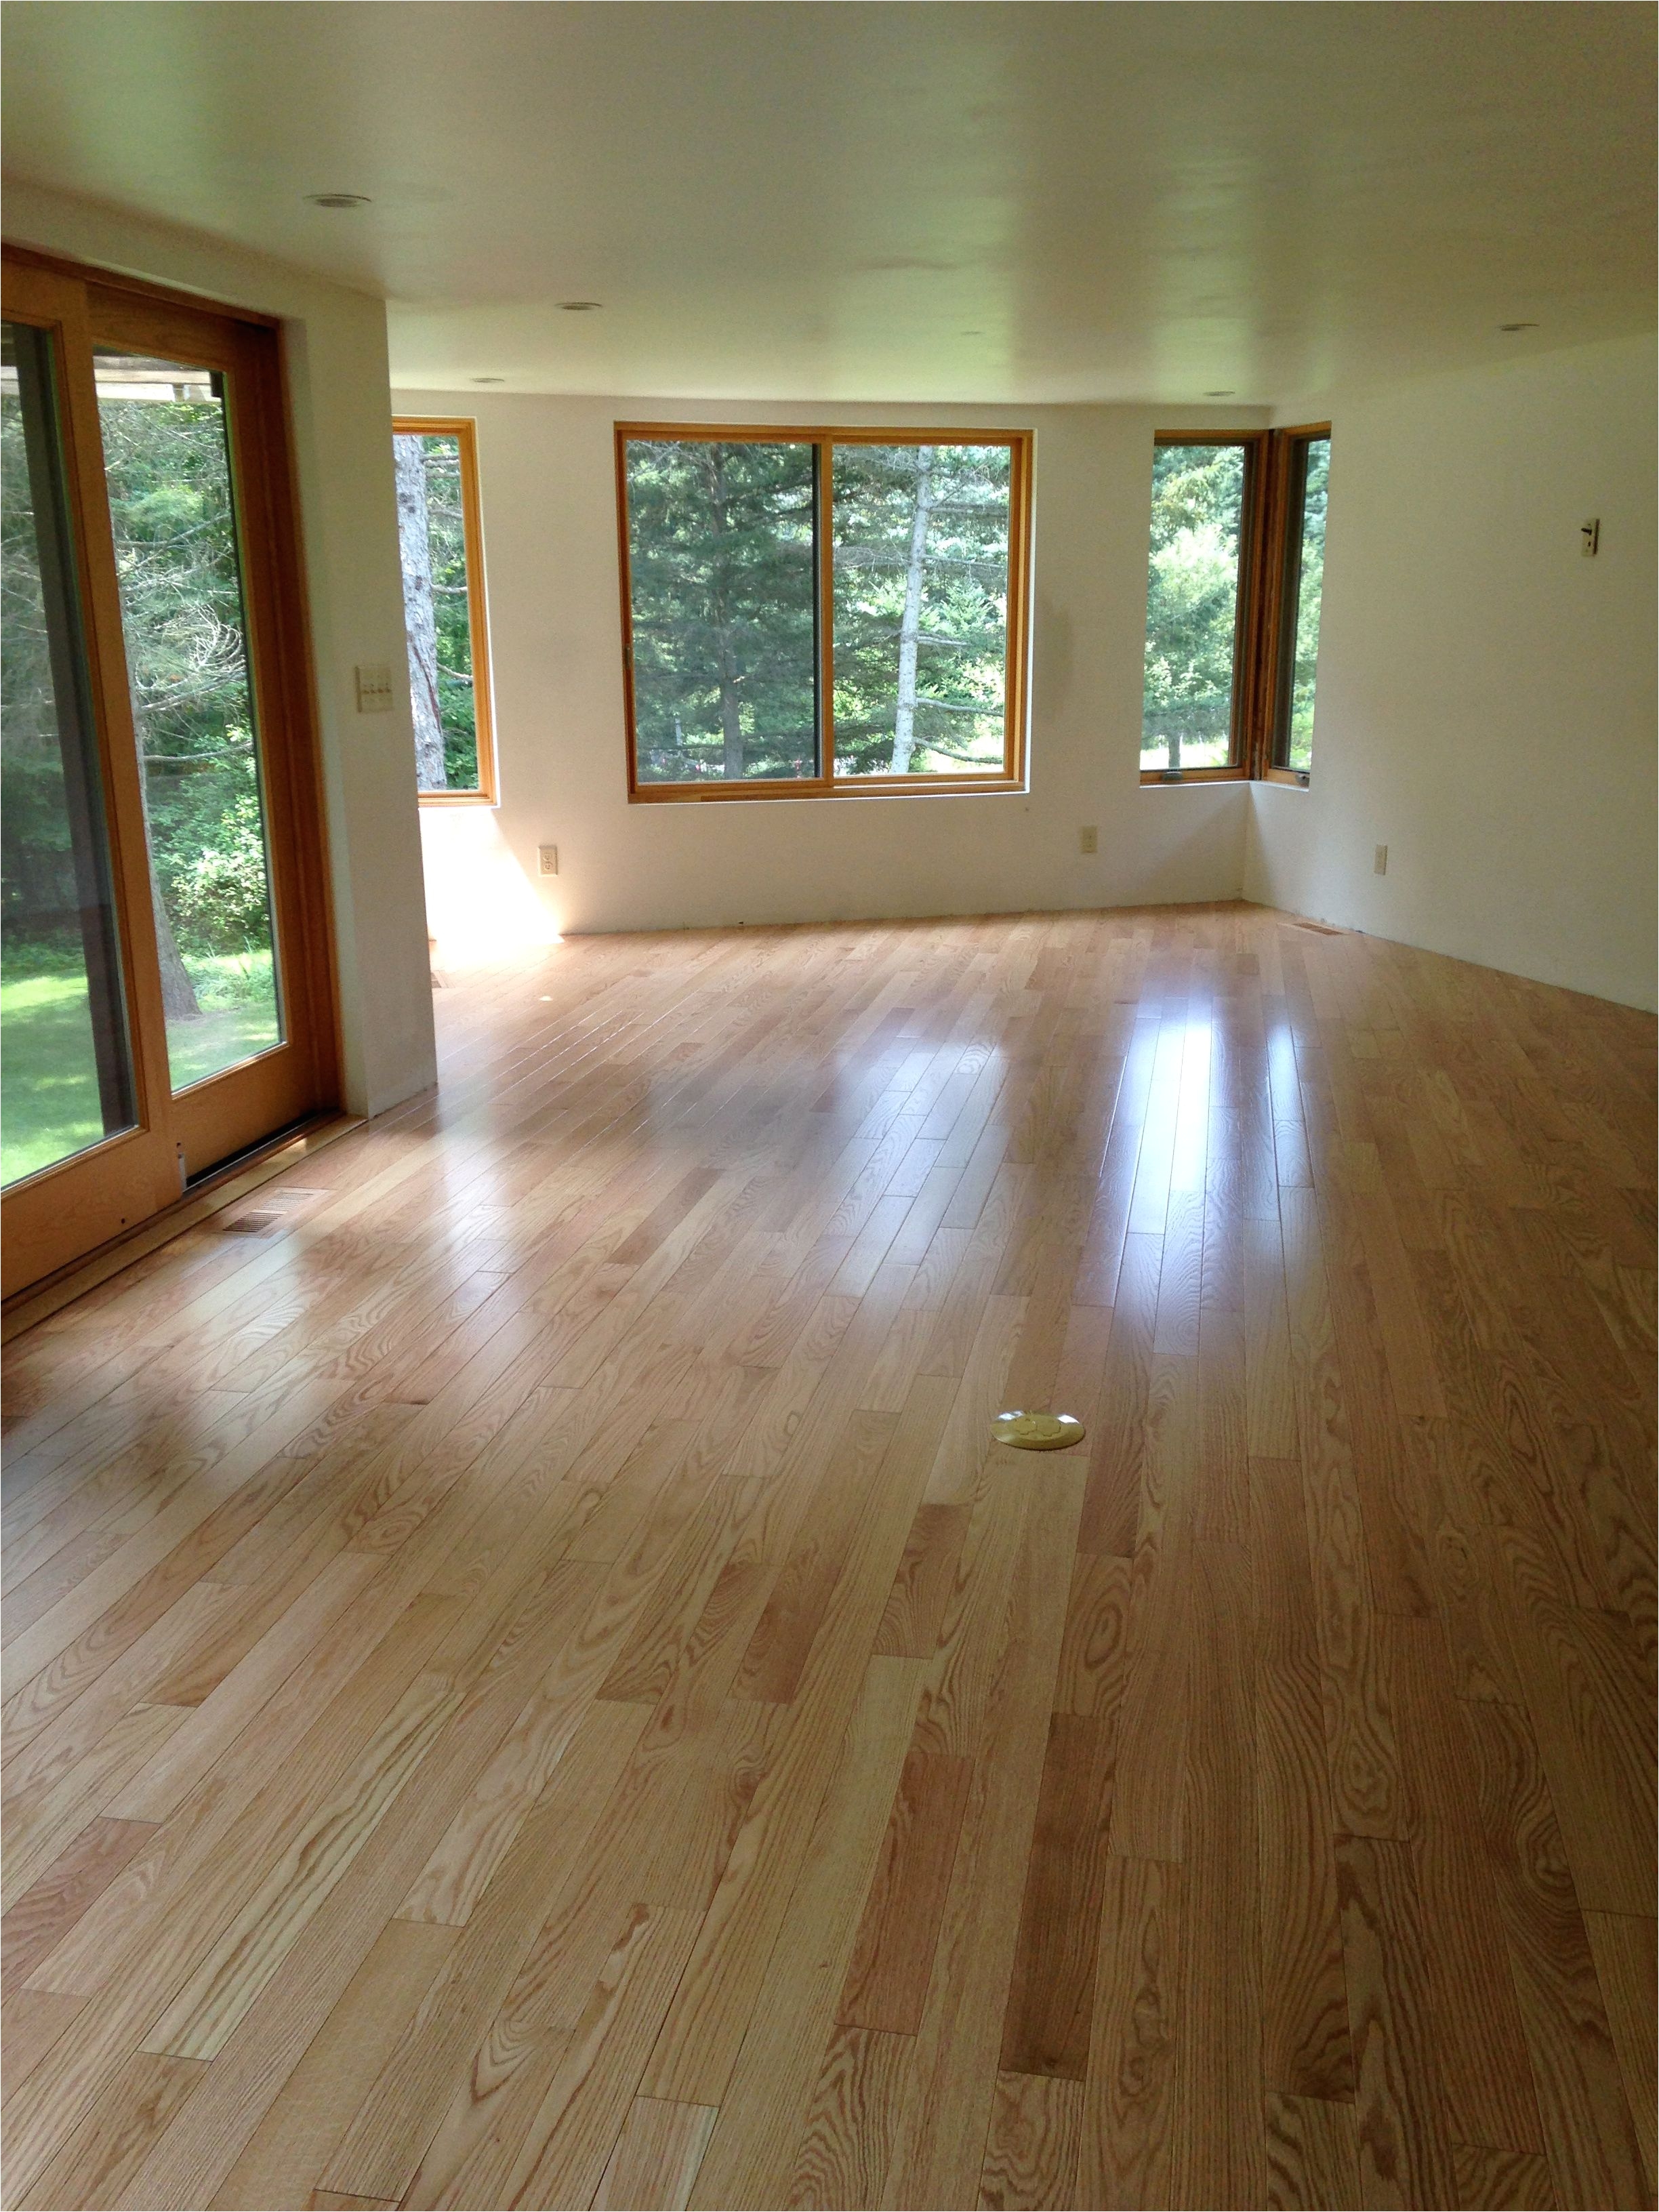 hardwood floor refinishing is an affordable way to spruce up your space without a full replacement learn if refinishing hardwood floors is for you